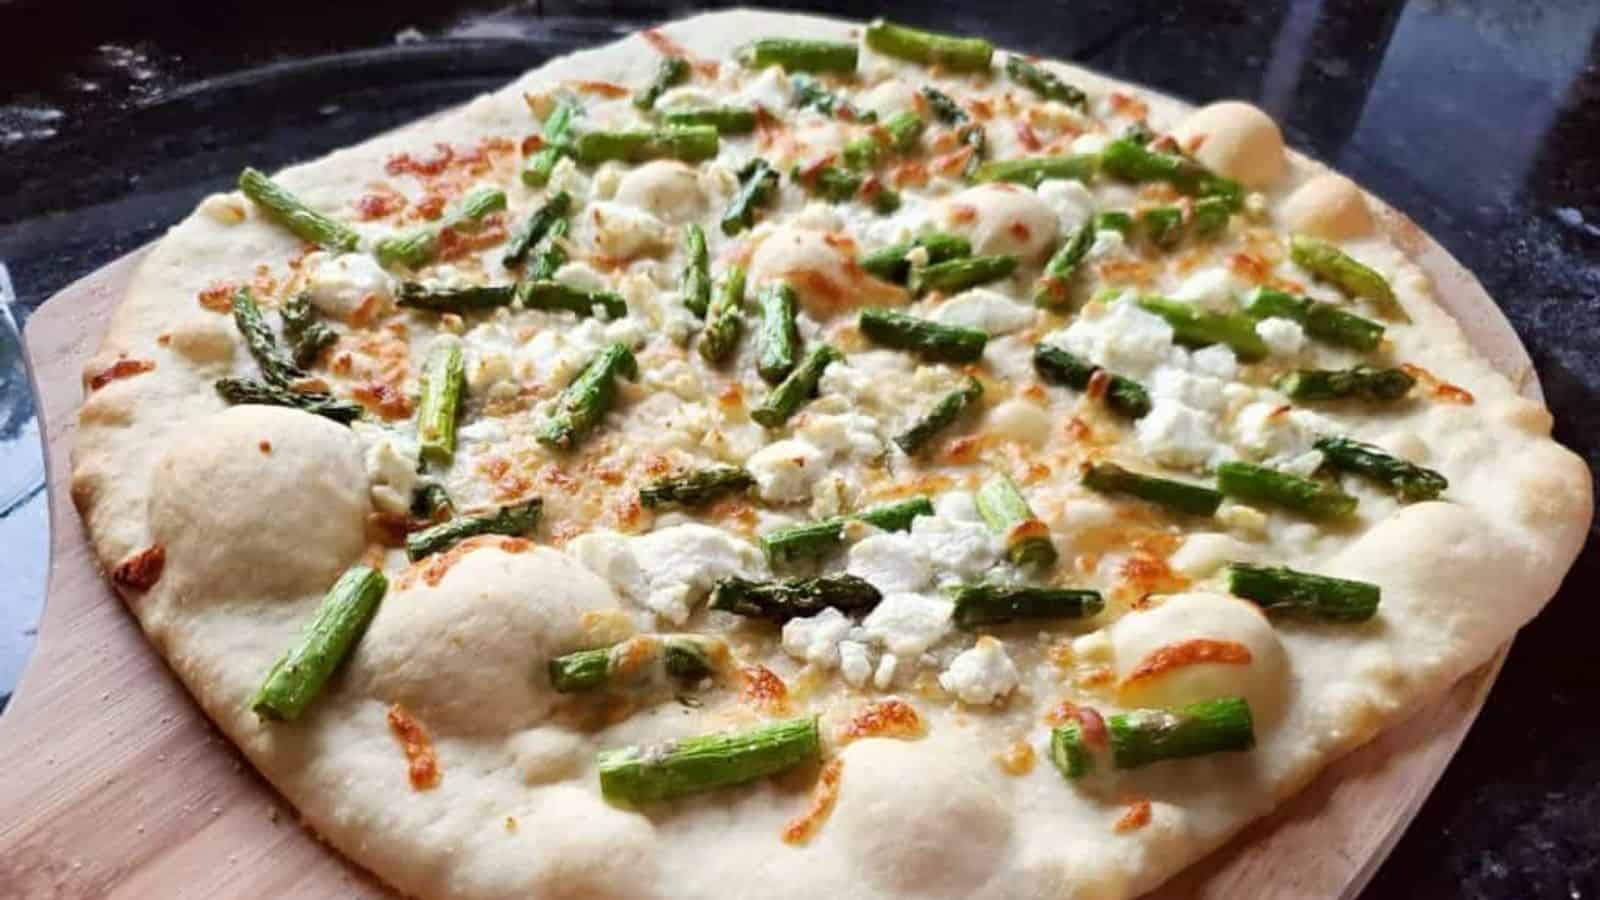 Image shows a close up of an Asparagus and Goat Cheese Pizza on a pizza peel sitting on a black counter.